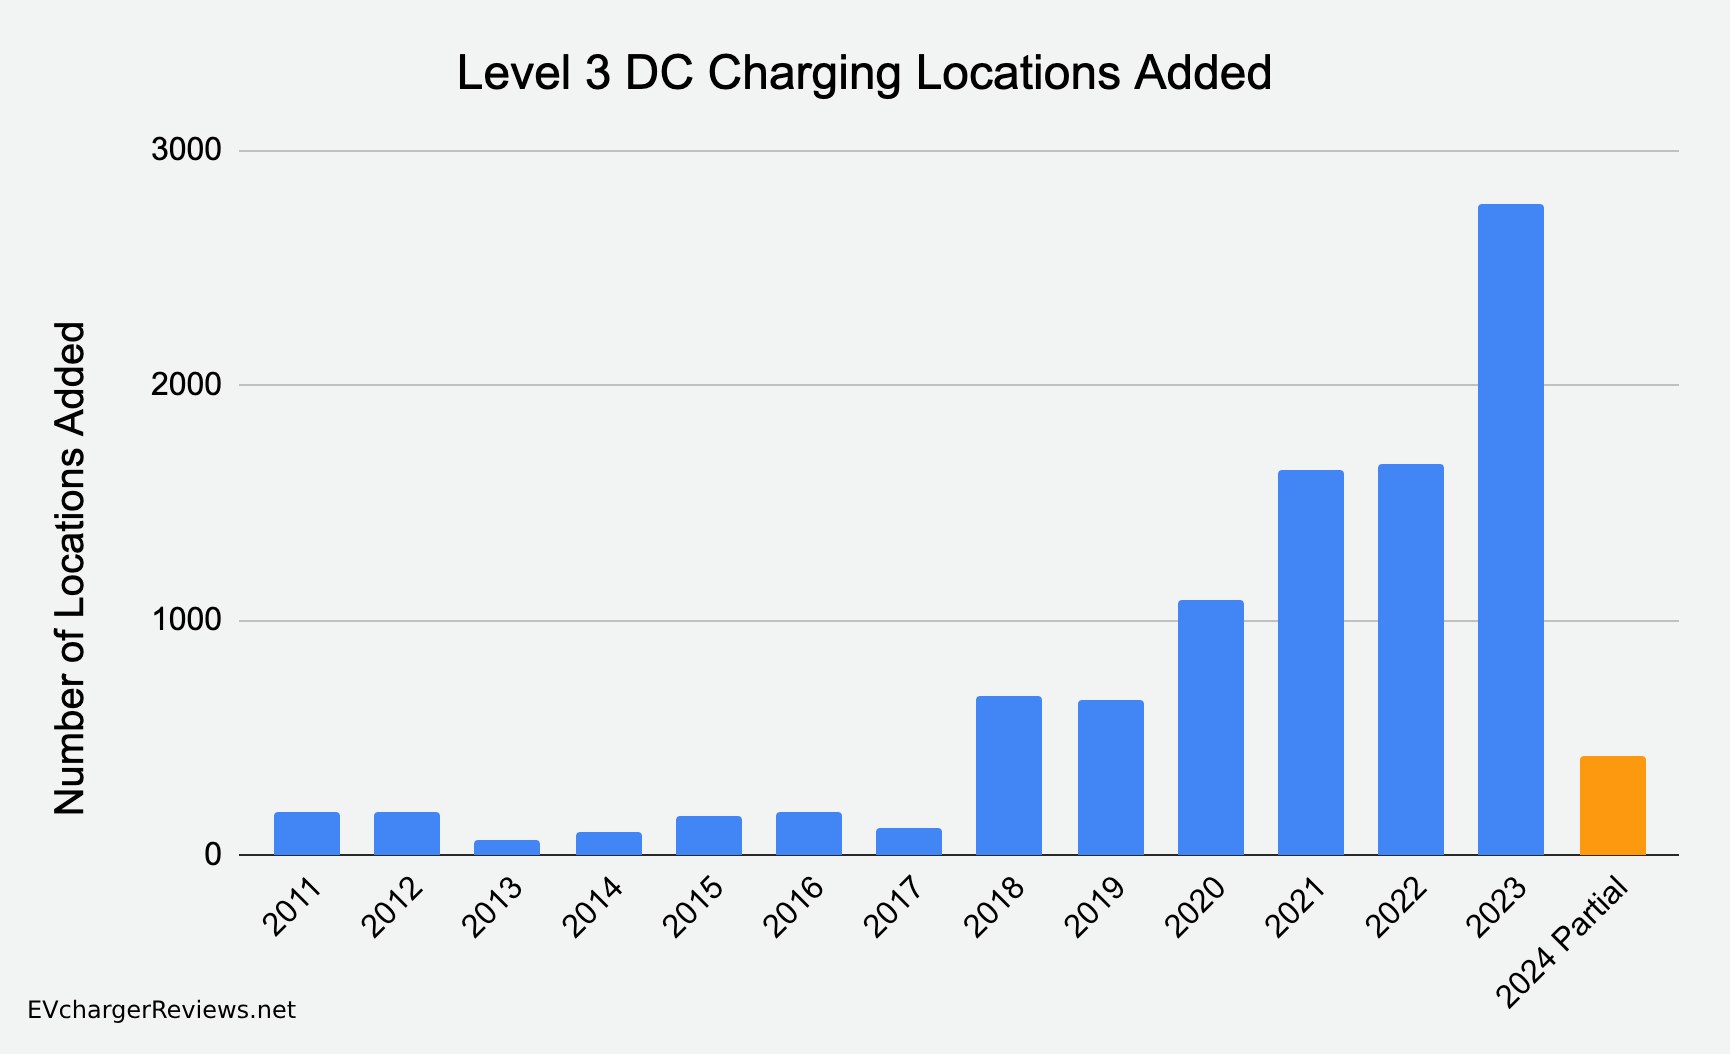 How many DC chargers are added annually in the USA